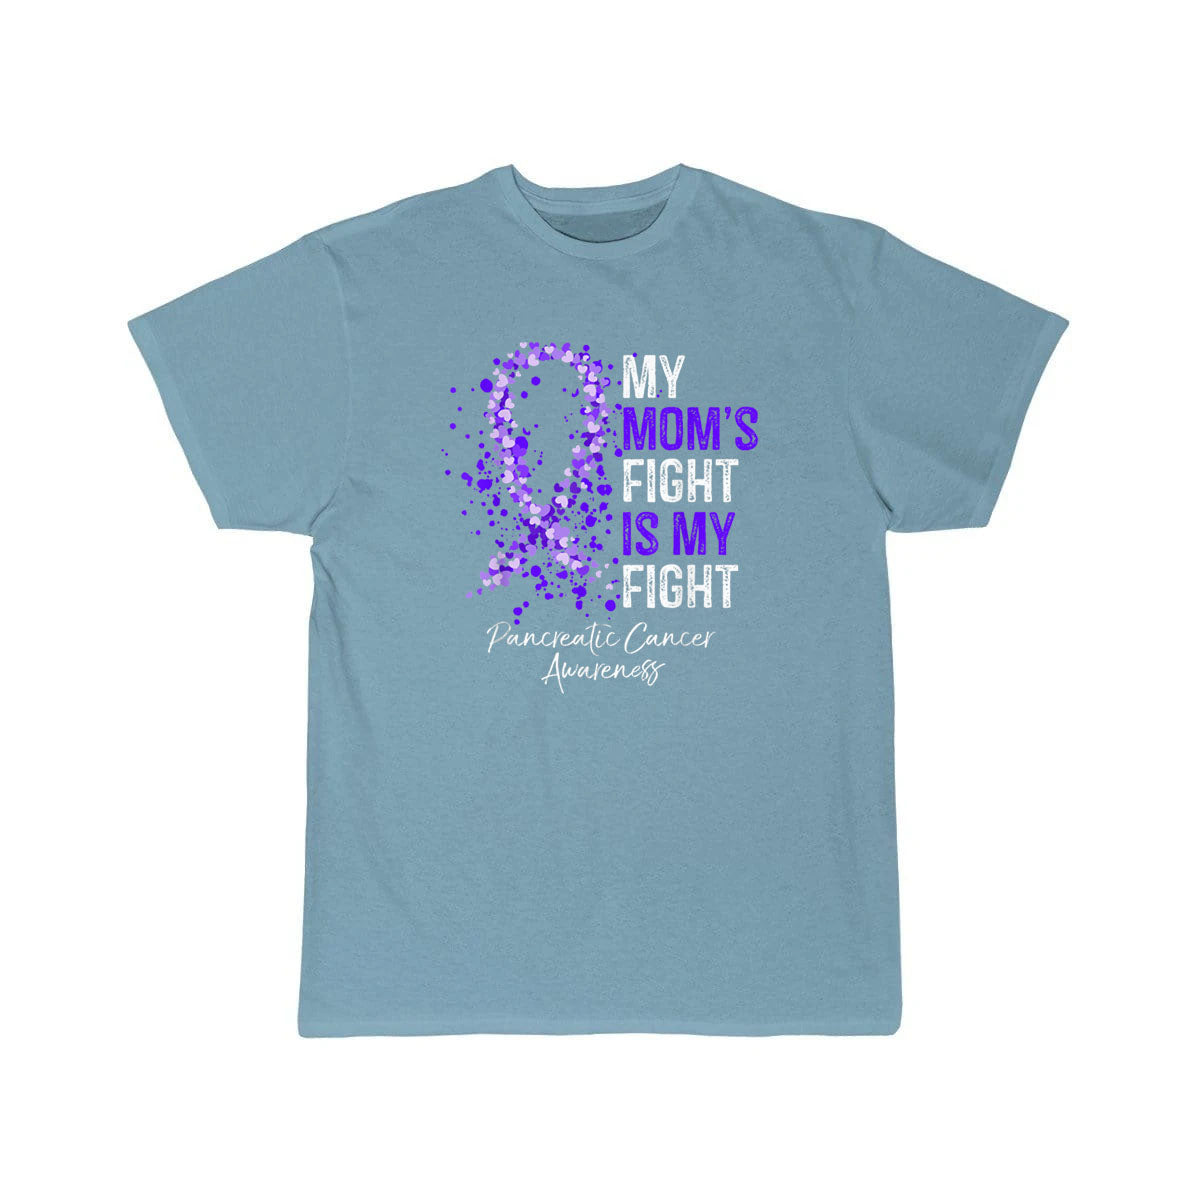 My Moms Fight Is My Fight Pancreatic Cancer T SHIRT THE AV8R